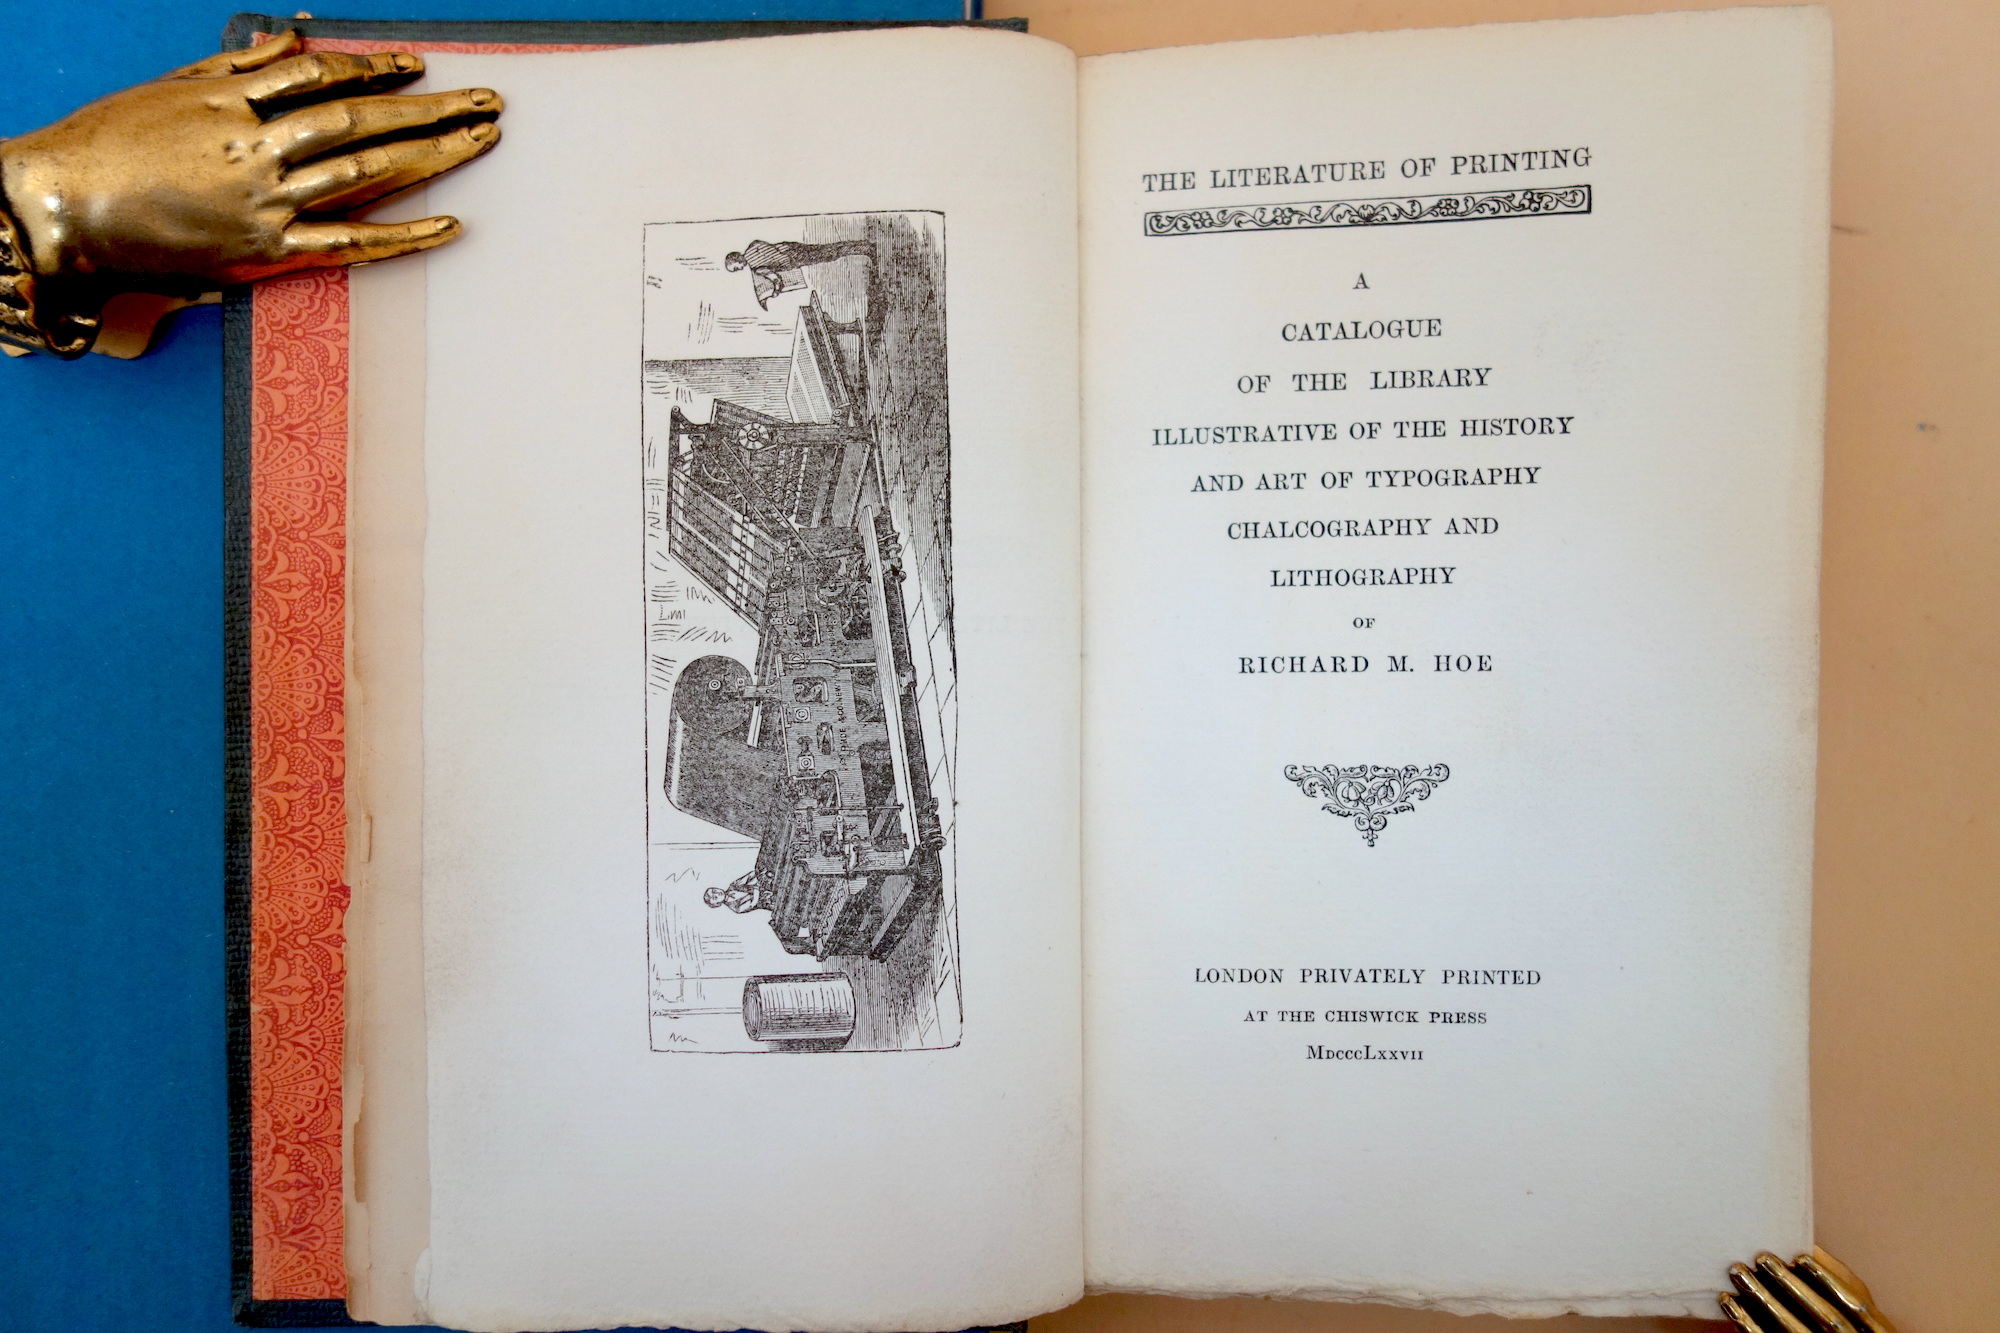 Title page and frontispiece of Richard Hoe's catalogue of his library on the history of printing